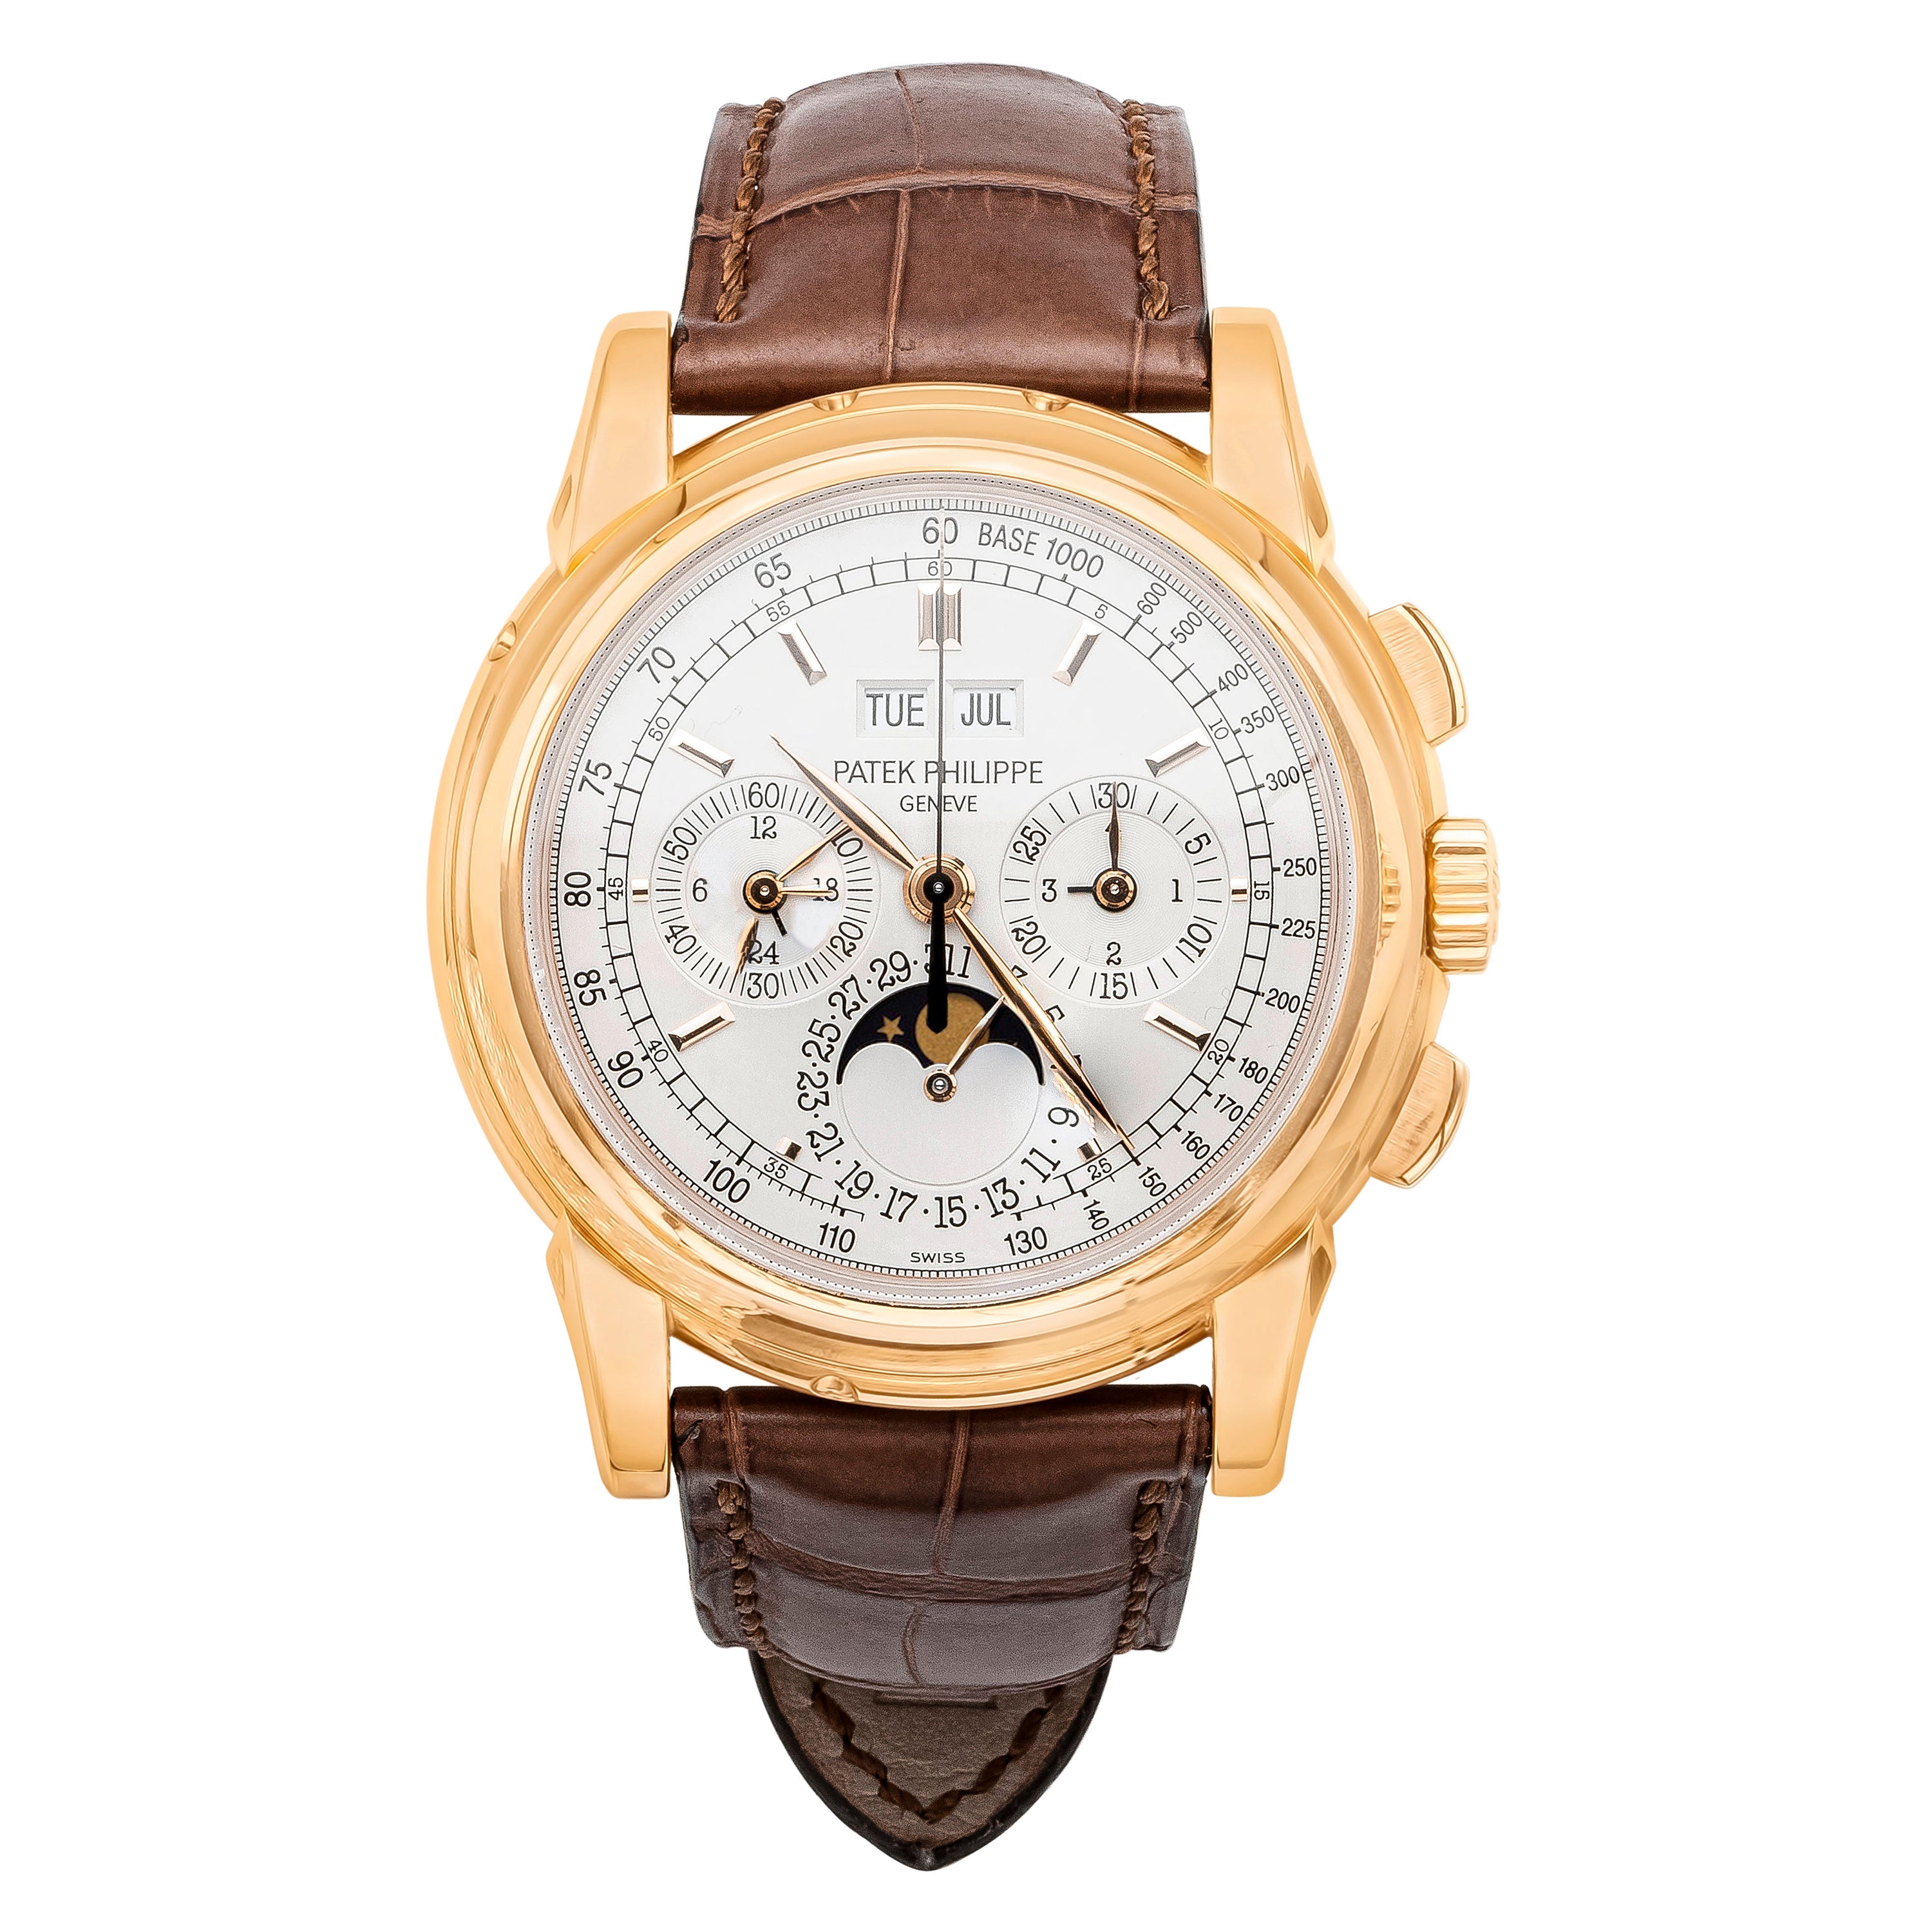 Patek Philippe 5970R Grand Complications Perpetual Calendar Chronograph Watch For Sale